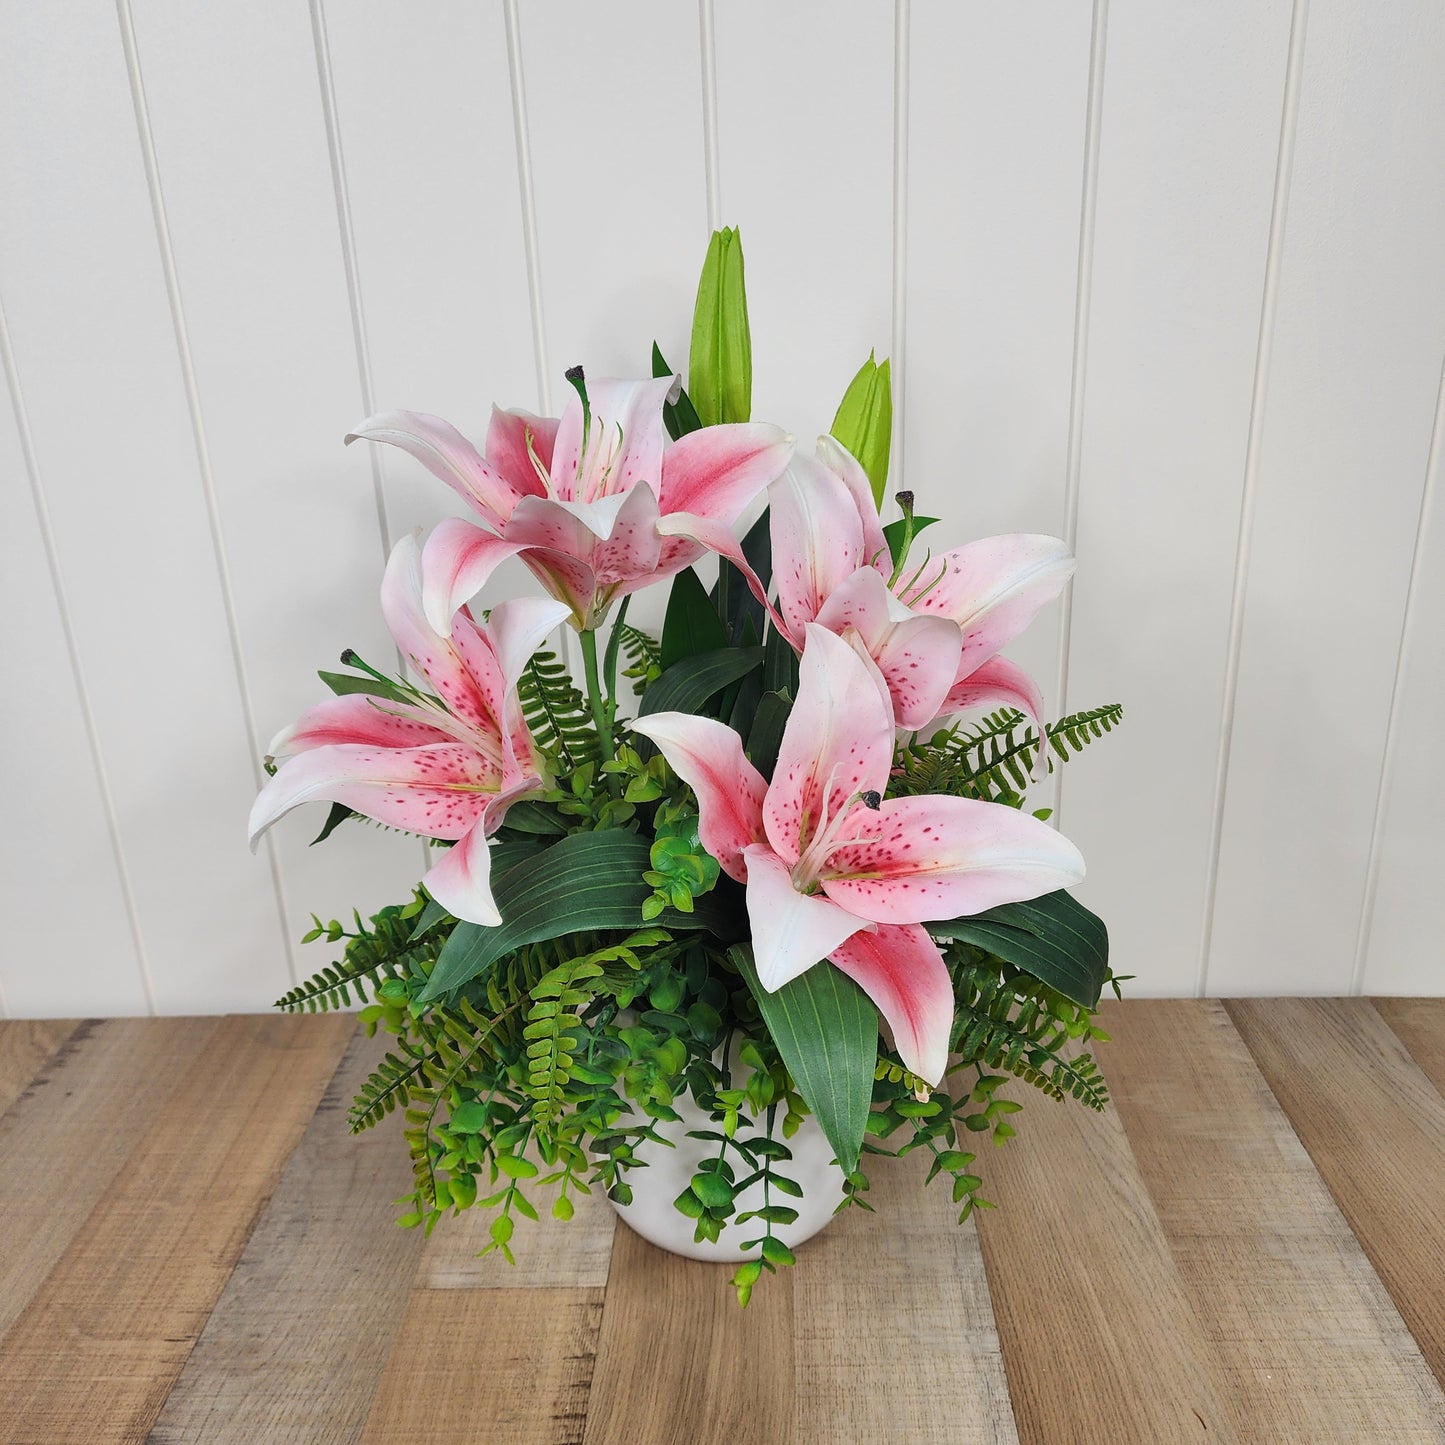 Oriental Lily Arrangement Small - Realistic Artificial Flowers